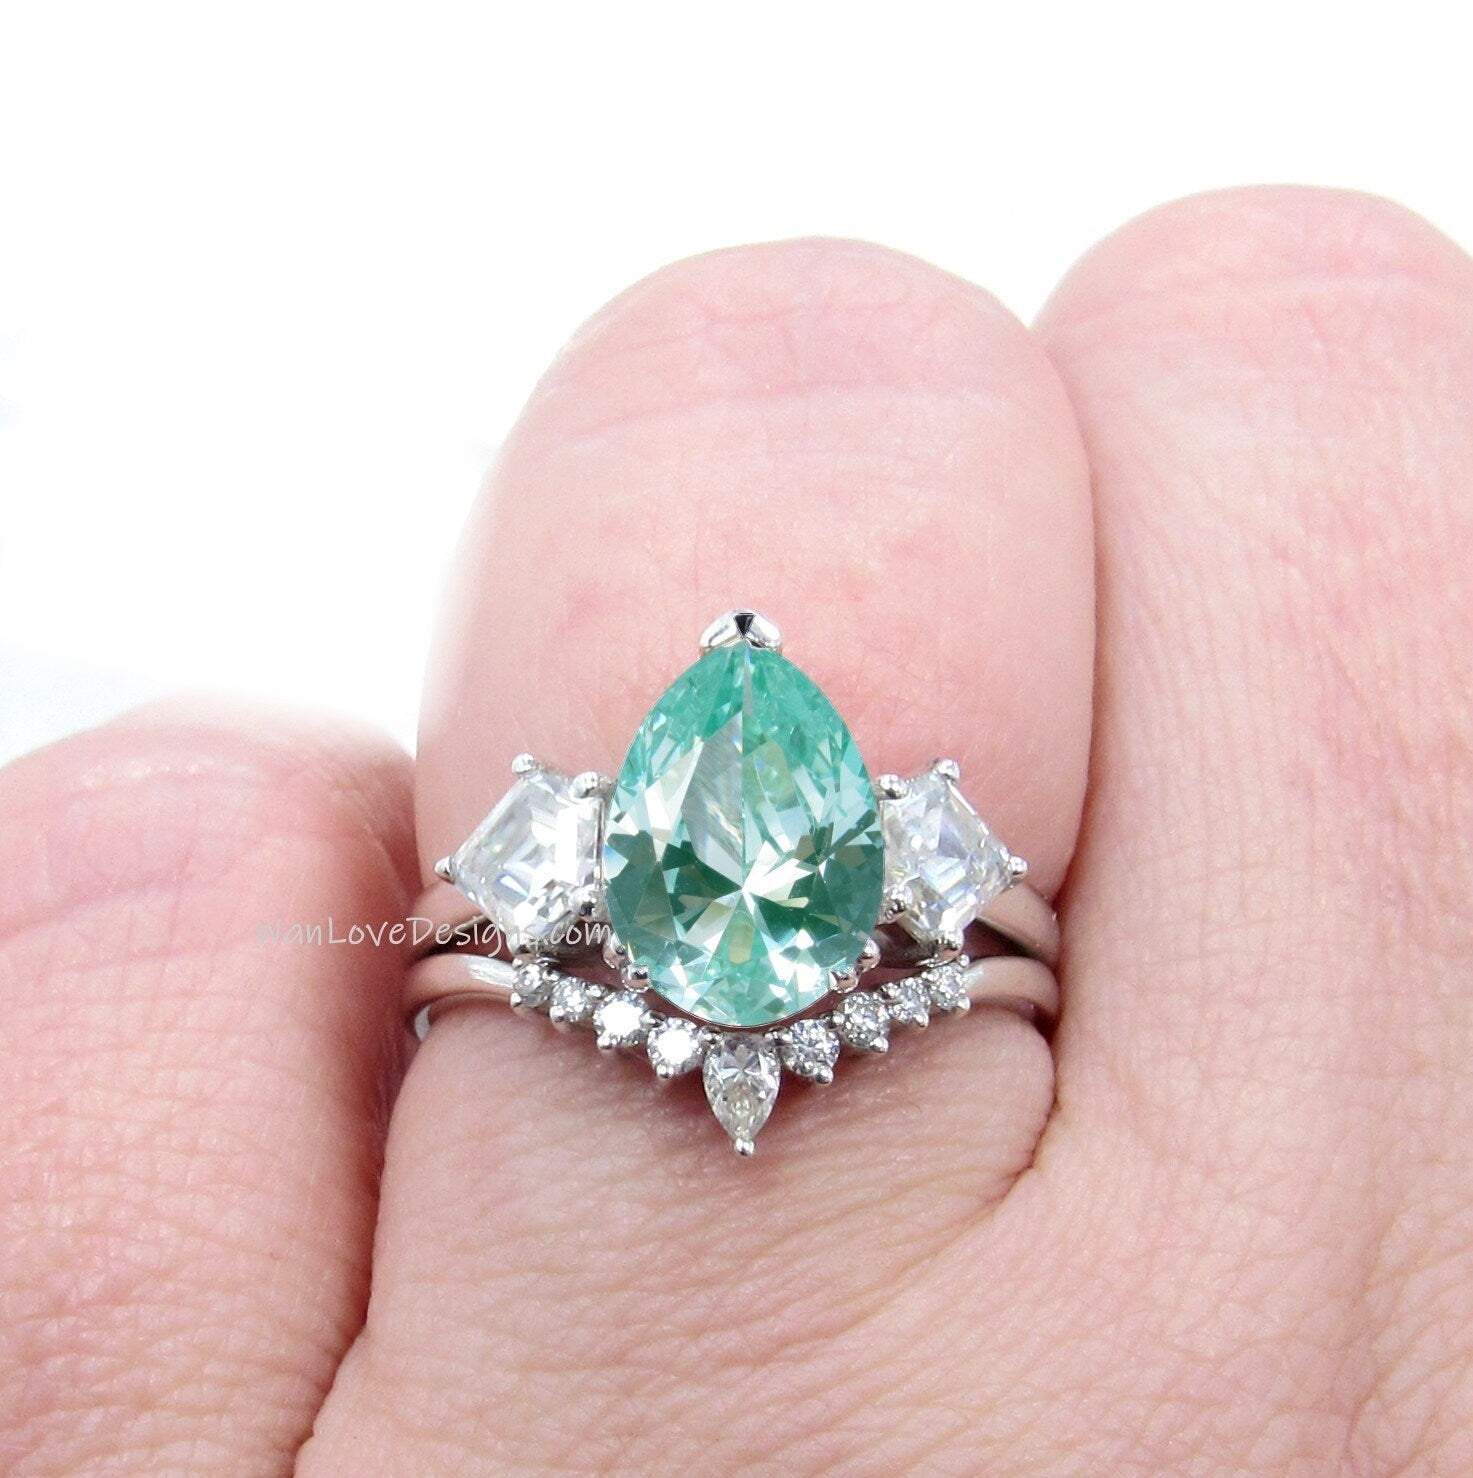 Teal Spinel cluster pear kite engagement ring, cluster ring, moissanite ring, moissanite kite ring, unique engagement ring, Anniversary Gift Wan Love Designs